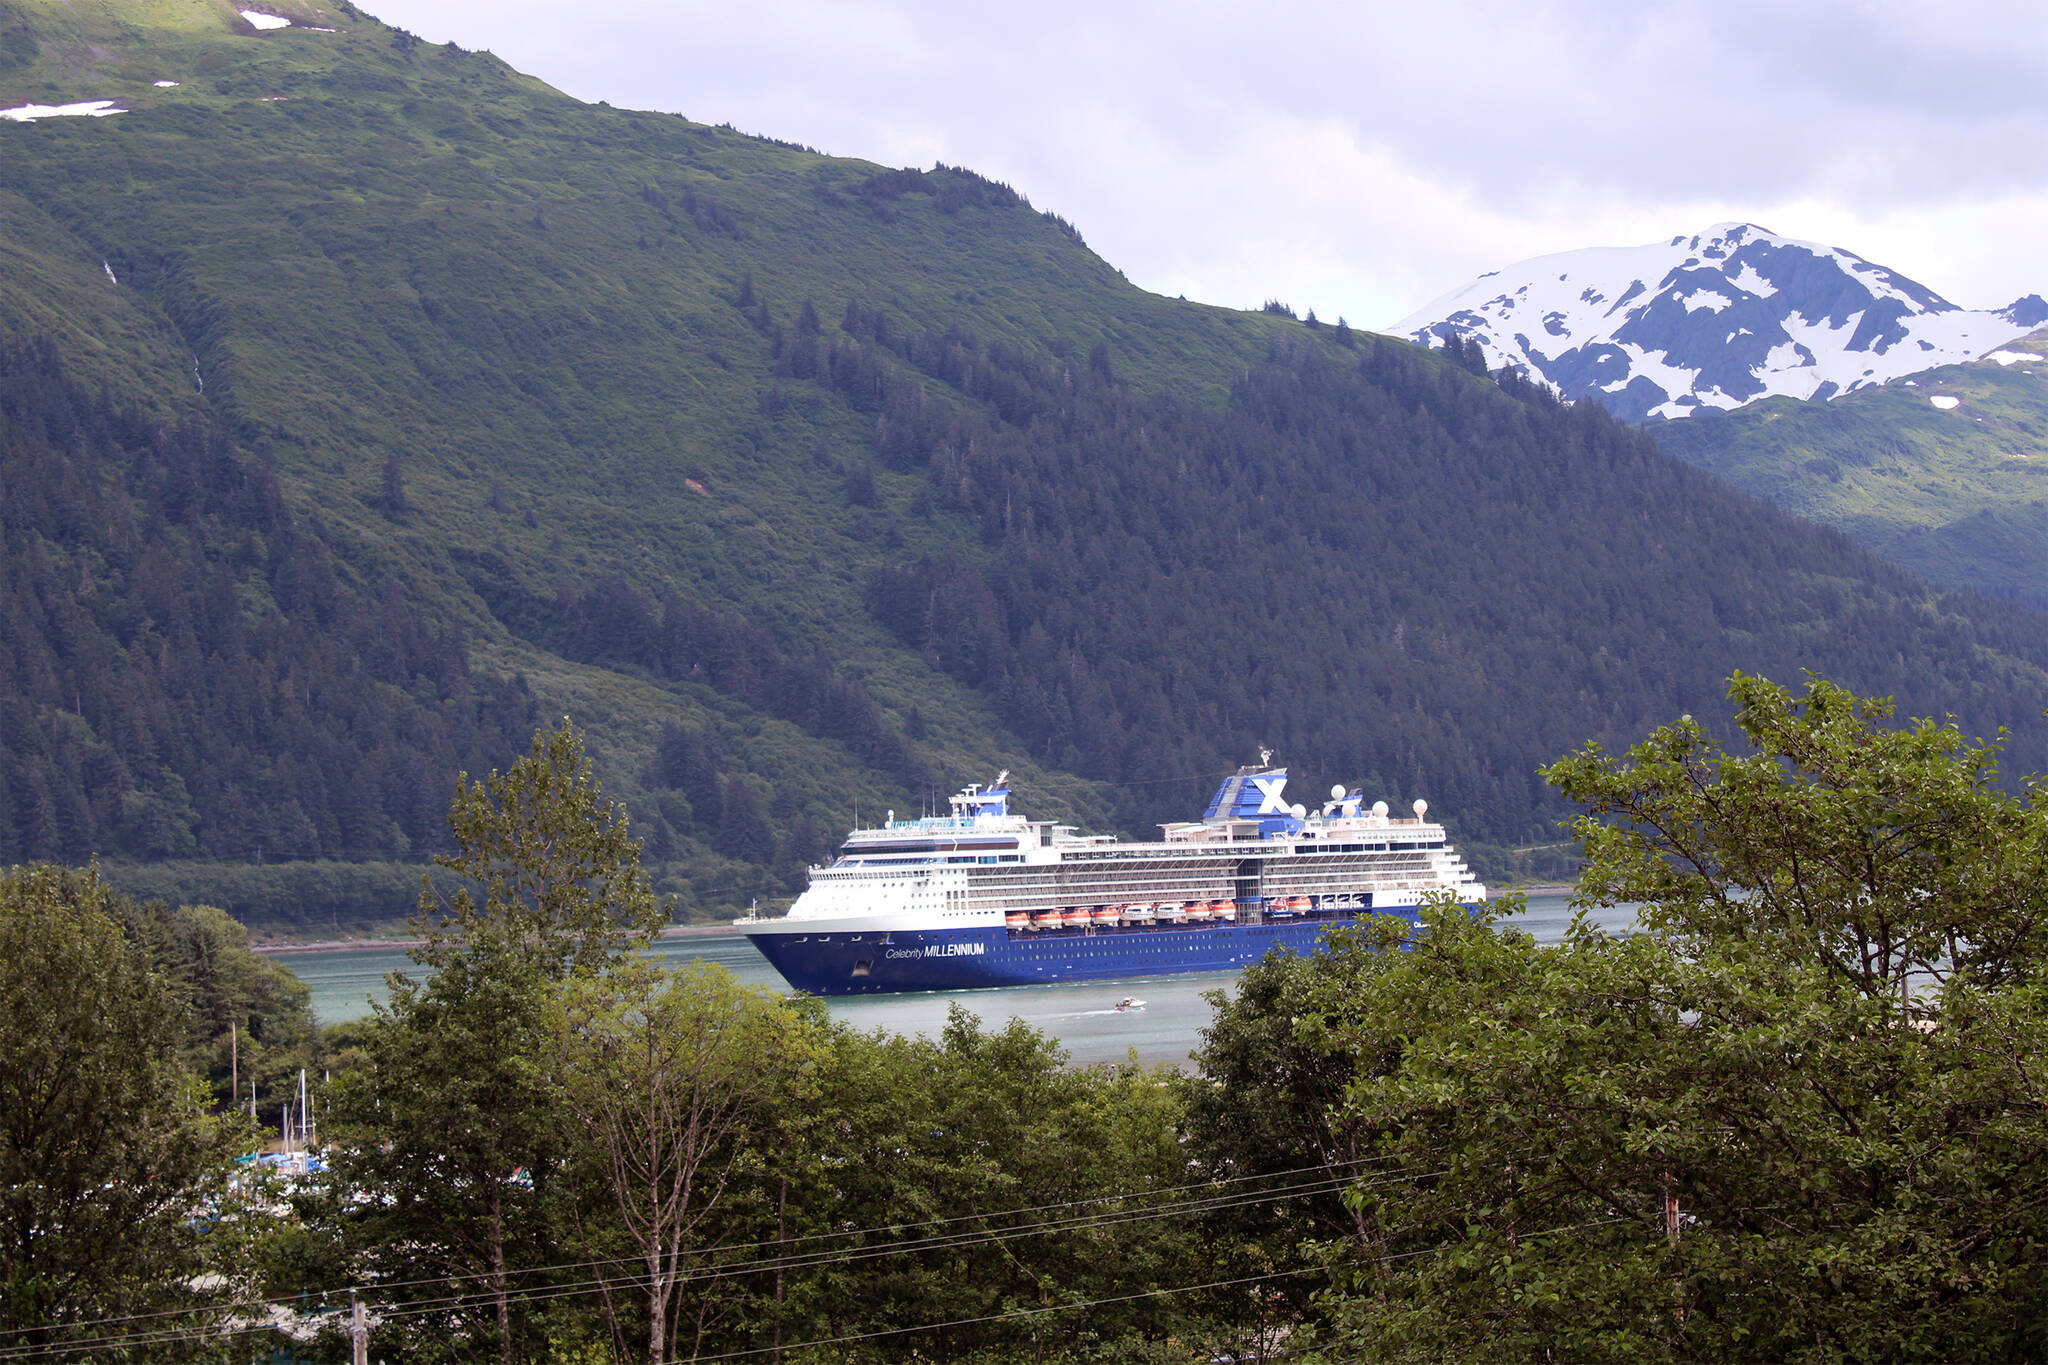 The Celebrity Millennium sails into the Port of Juneau early on the morning of July 26, 2021. During this voyage, onboard purchases were exempt from the City and Borough of Juneau's sales tax. However, a new ordinance winding through the City Assembly could change that for next year. (Dana Zigmund/Juneau Empire)